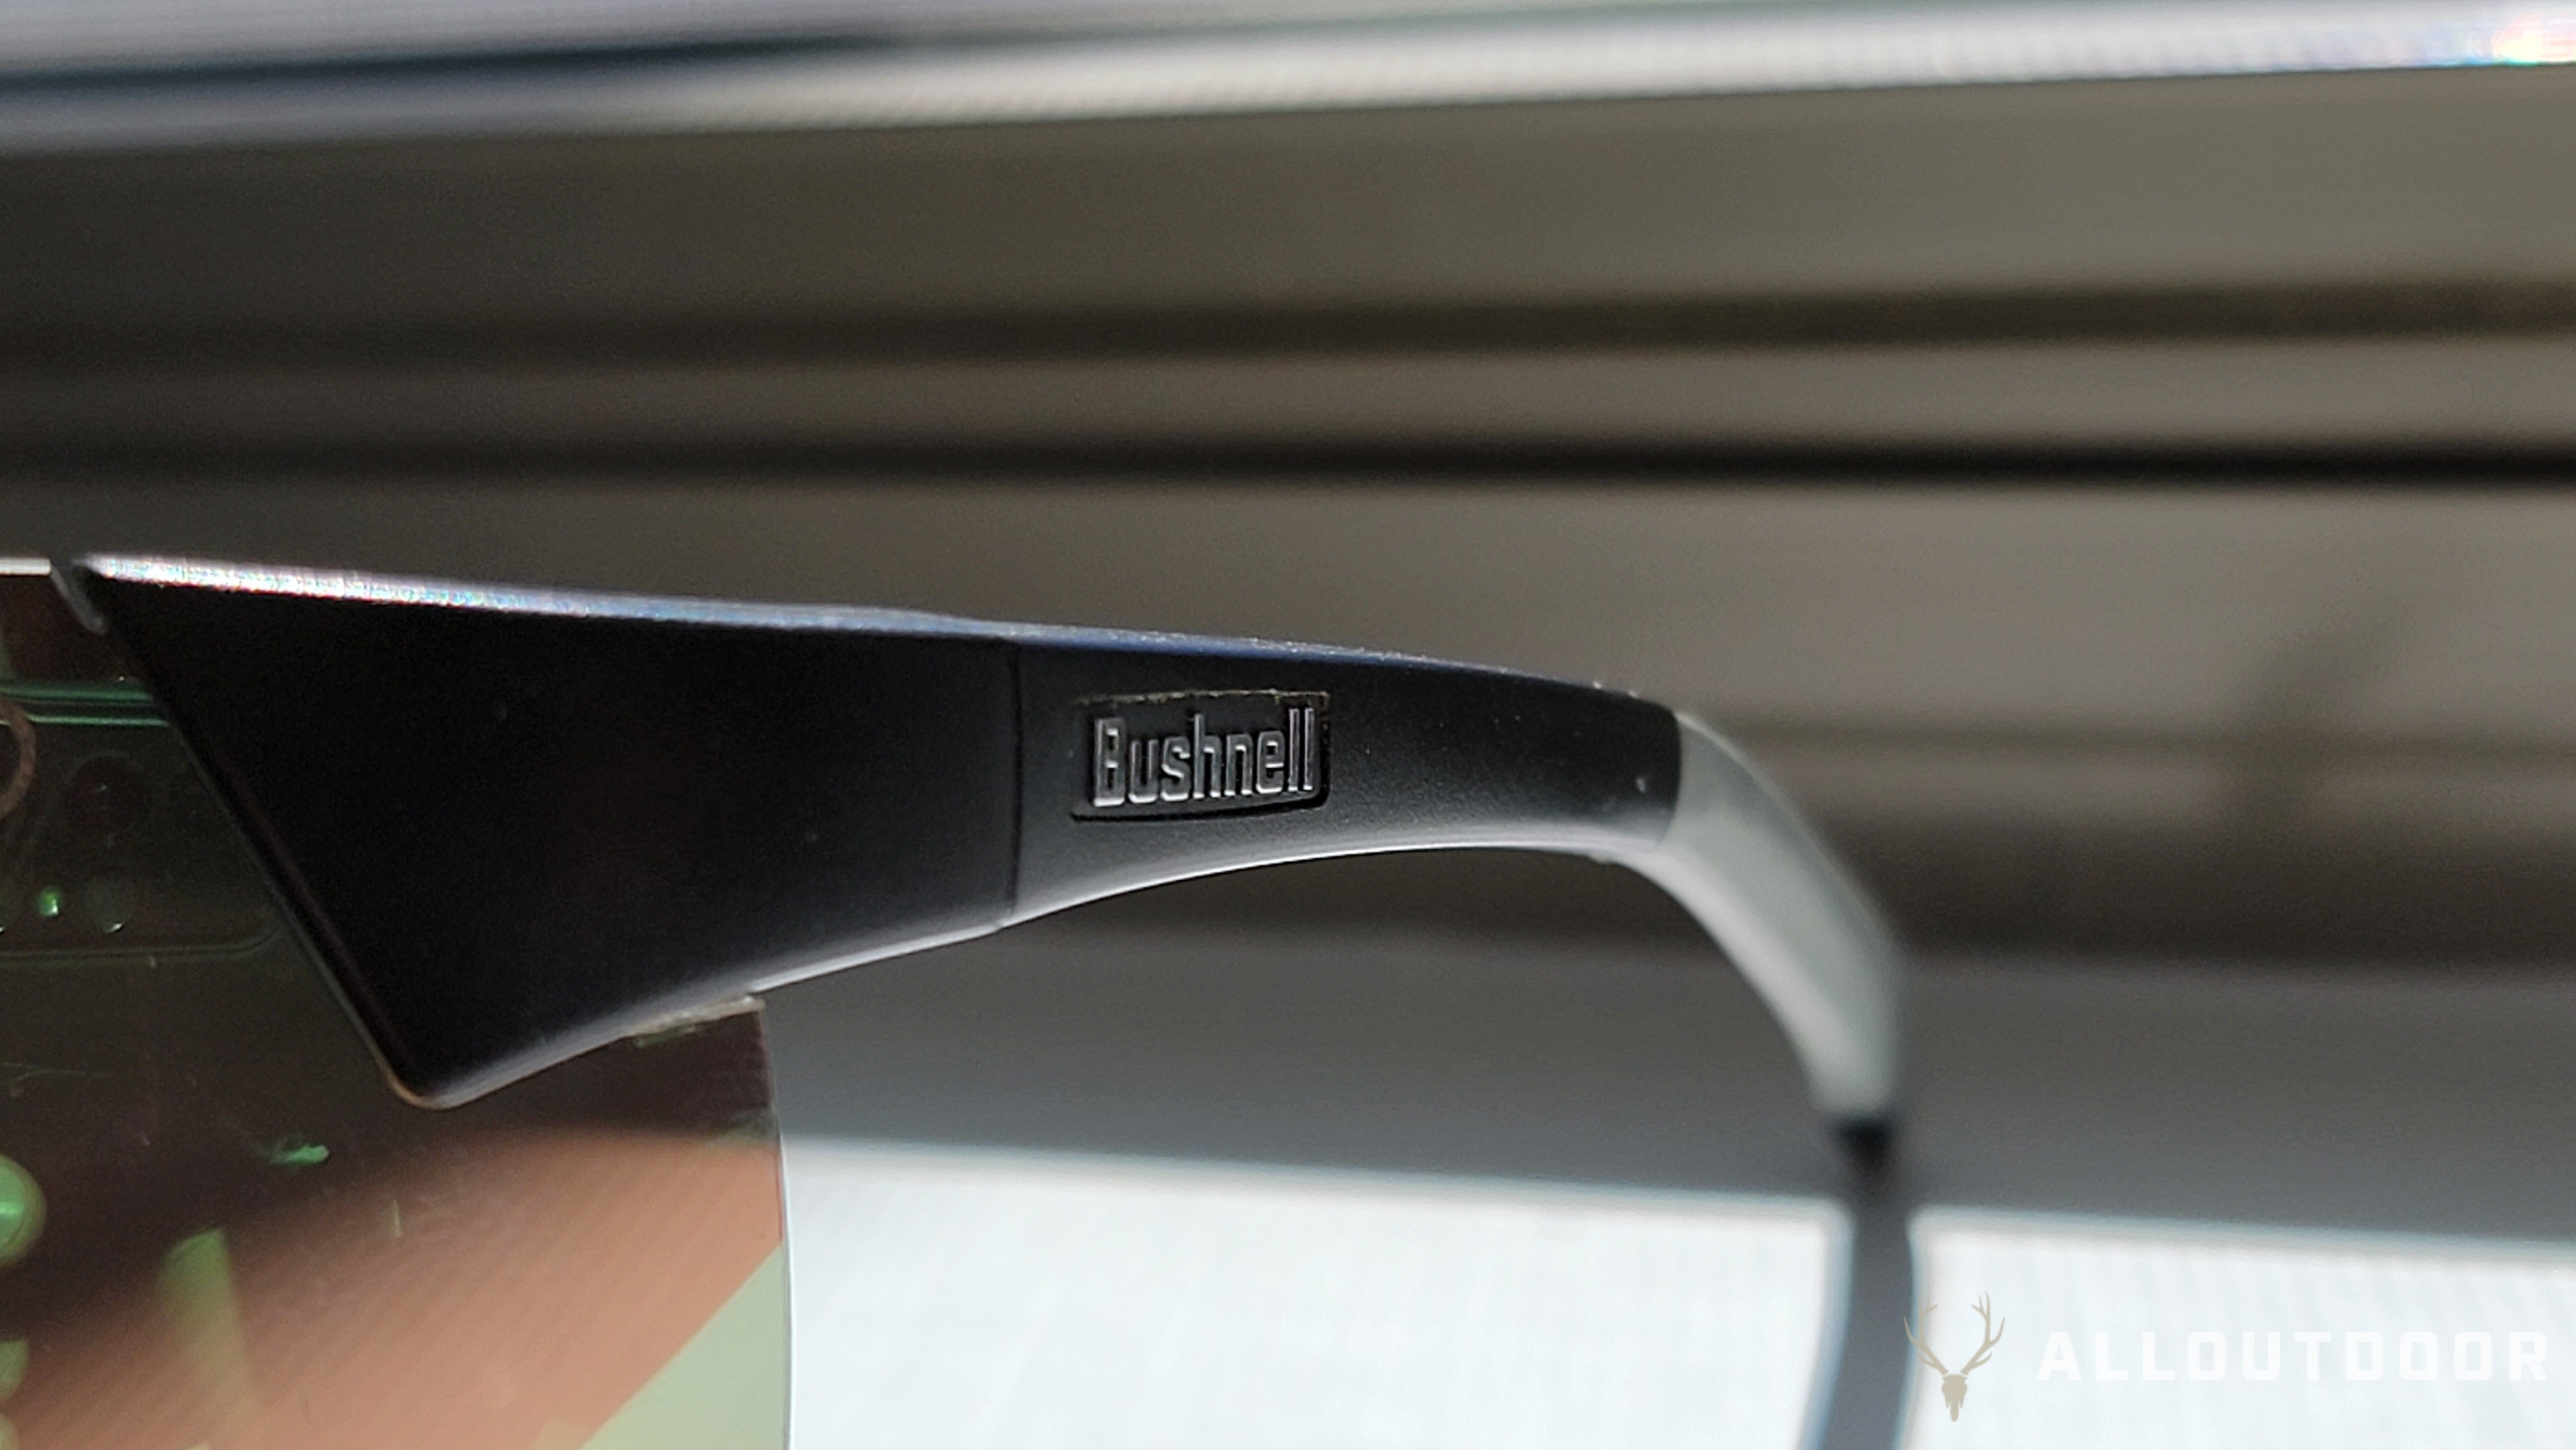 AllOutdoor Review: Bushnell's New Harrier Eye Protection